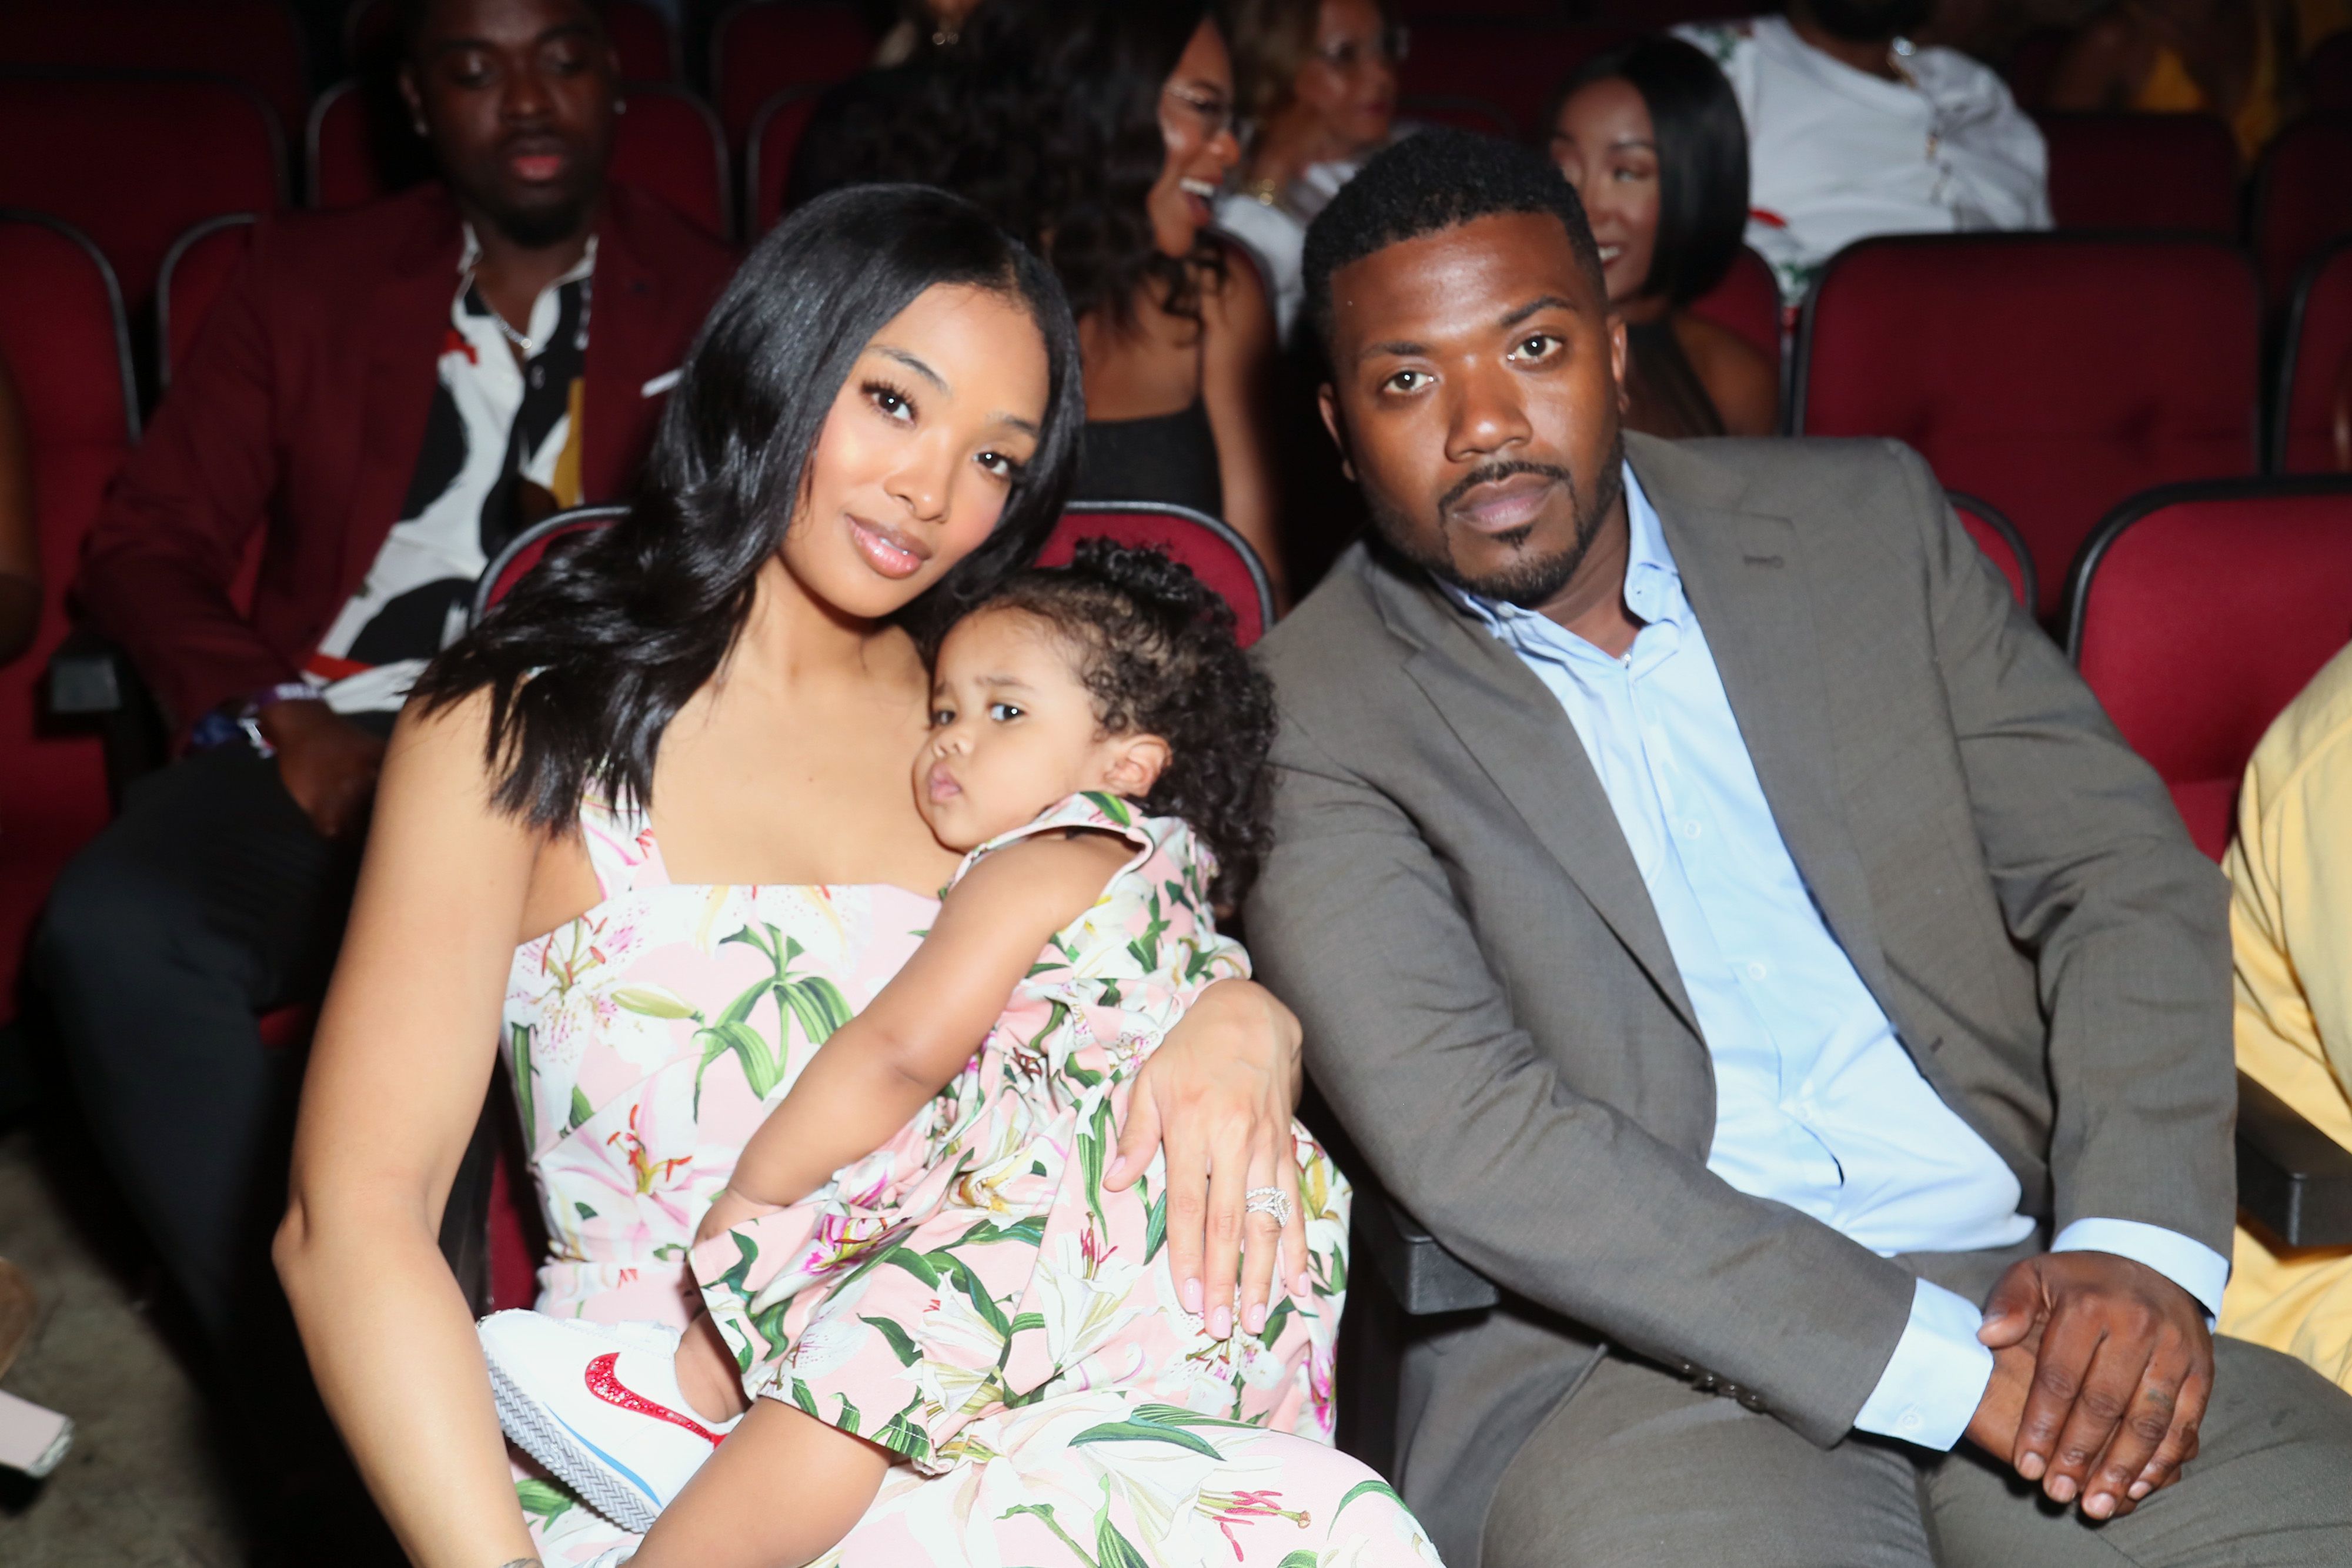 Princess Love and Ray J at the 2019 BET Awards at Microsoft Theater on June 23, 2019 in Los Angeles, California. | Source: Getty Images